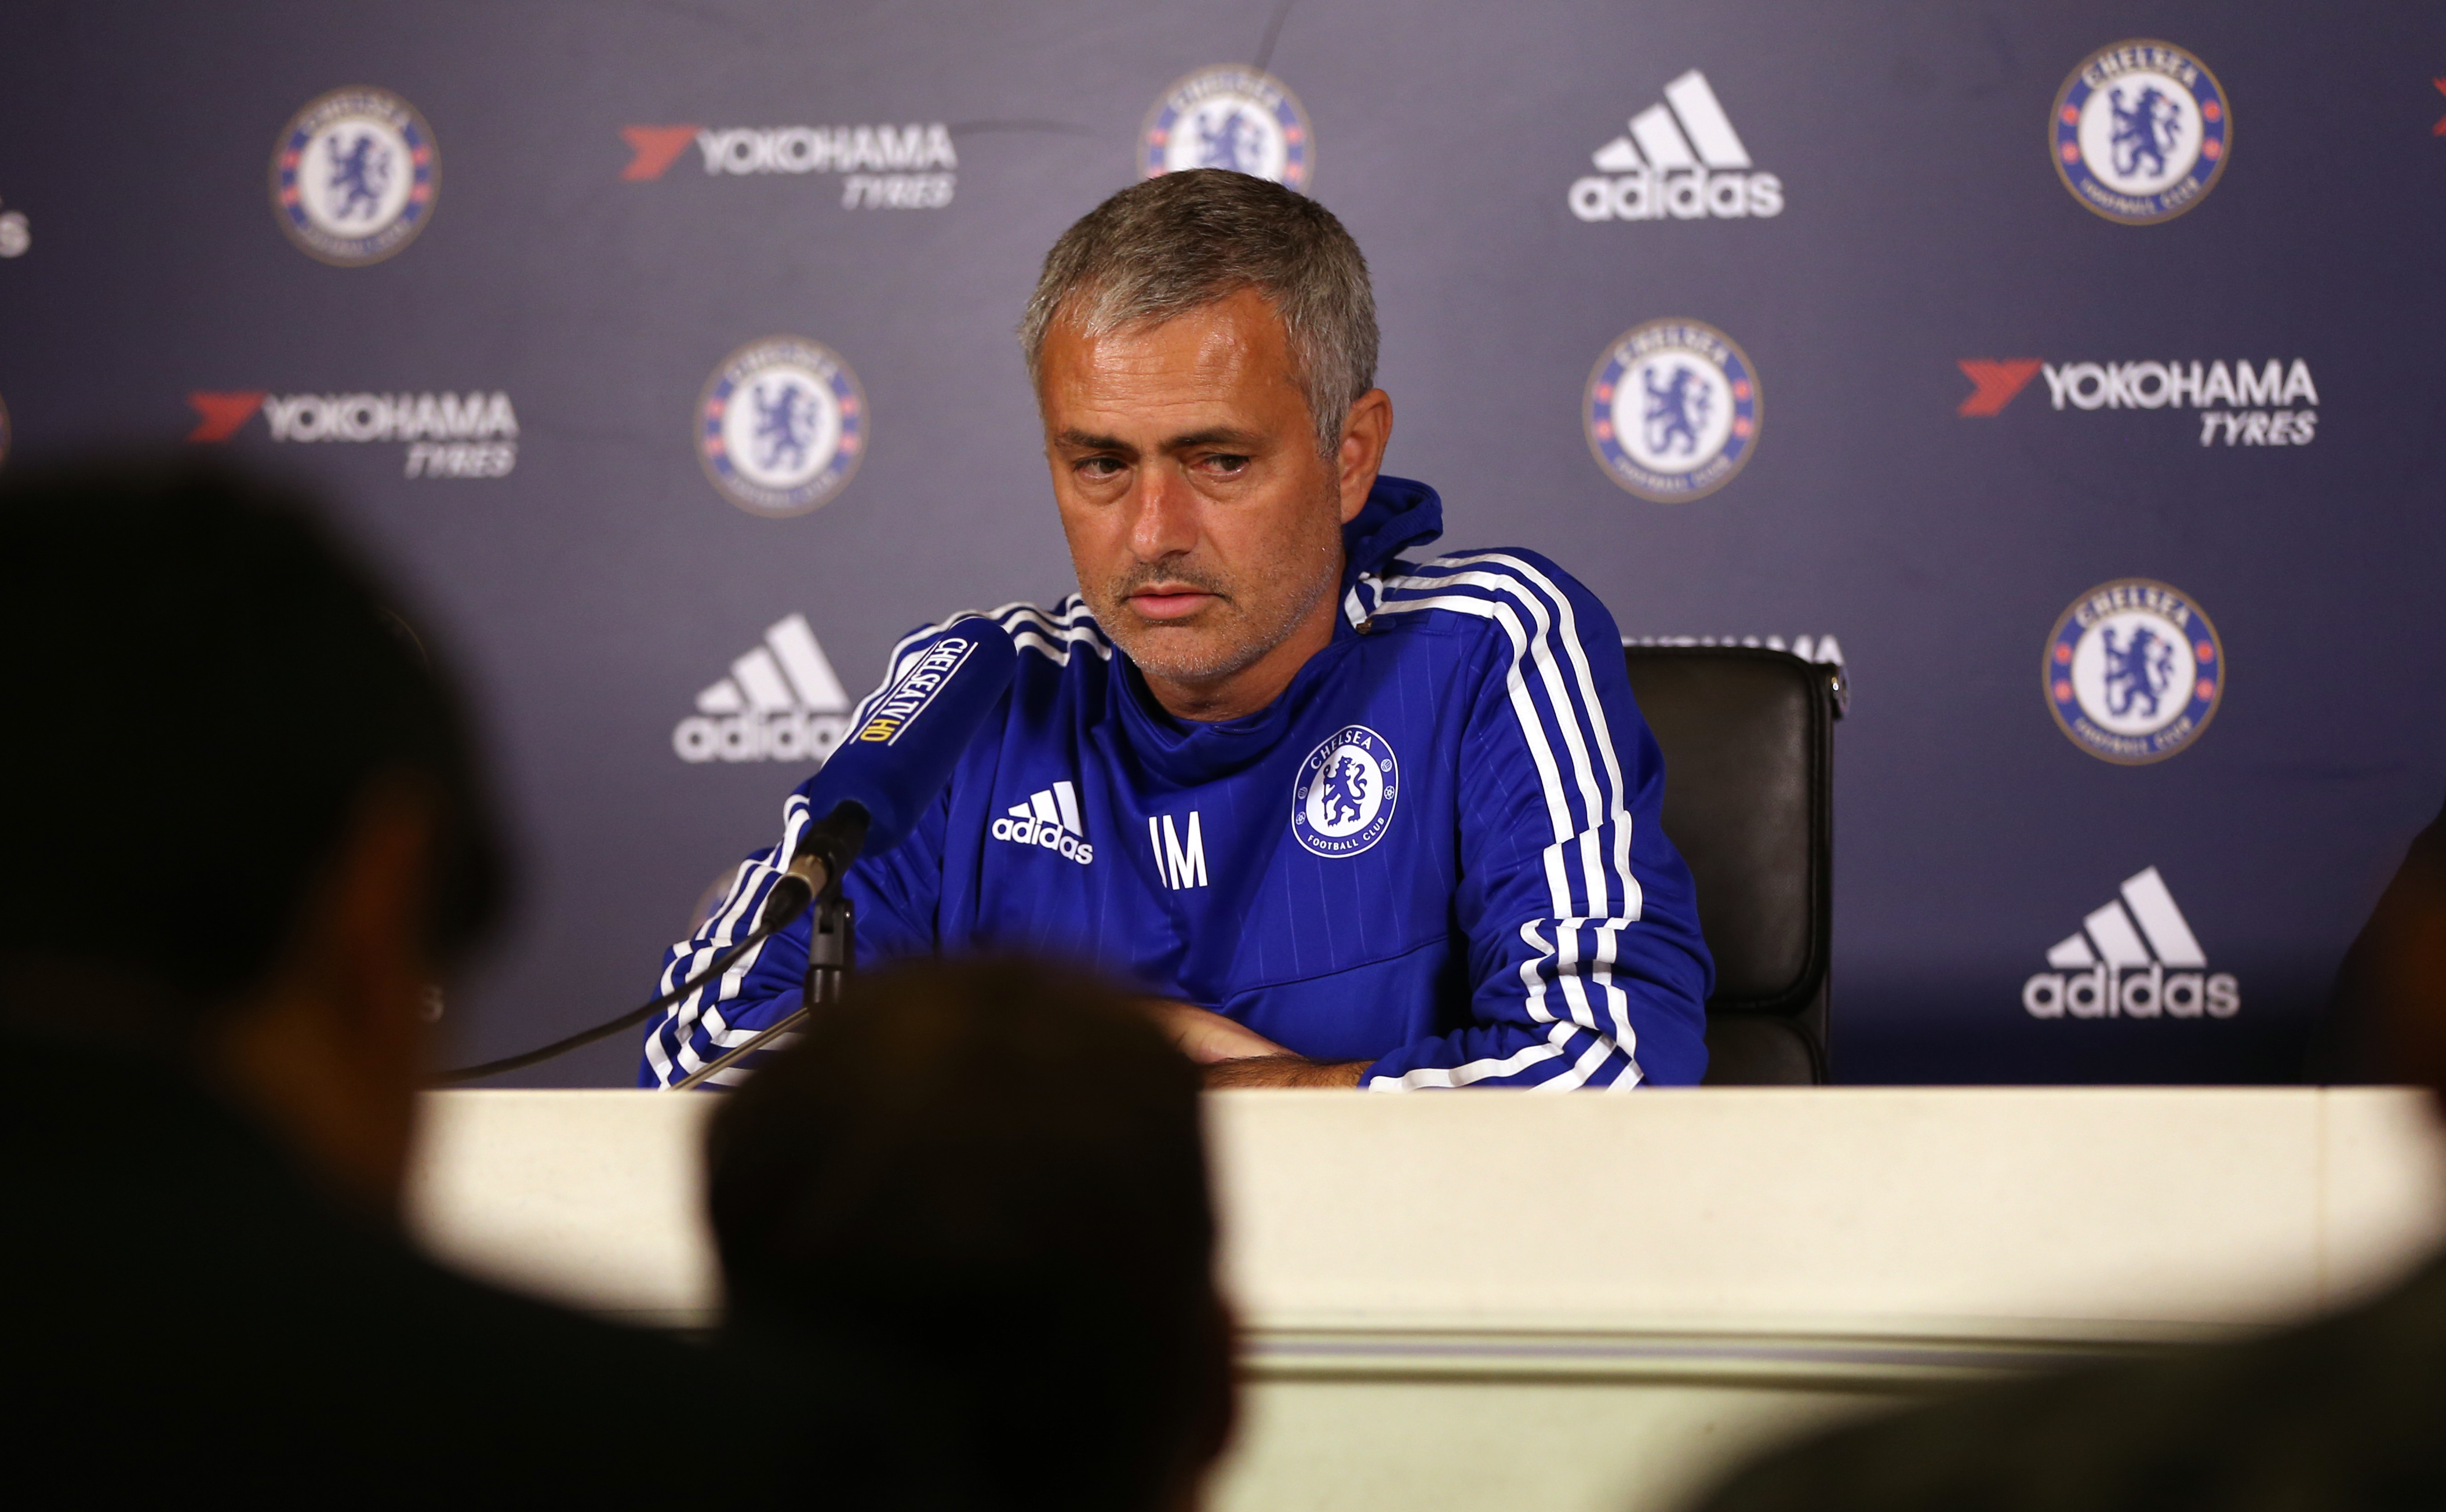 Football - Chelsea - Jose Mourinho Press Conference - Chelsea Training Ground - 2/10/15nChelsea Manager Jose Mourinho during press conferencenAction Images via Reuters / Alex MortonnLivepic